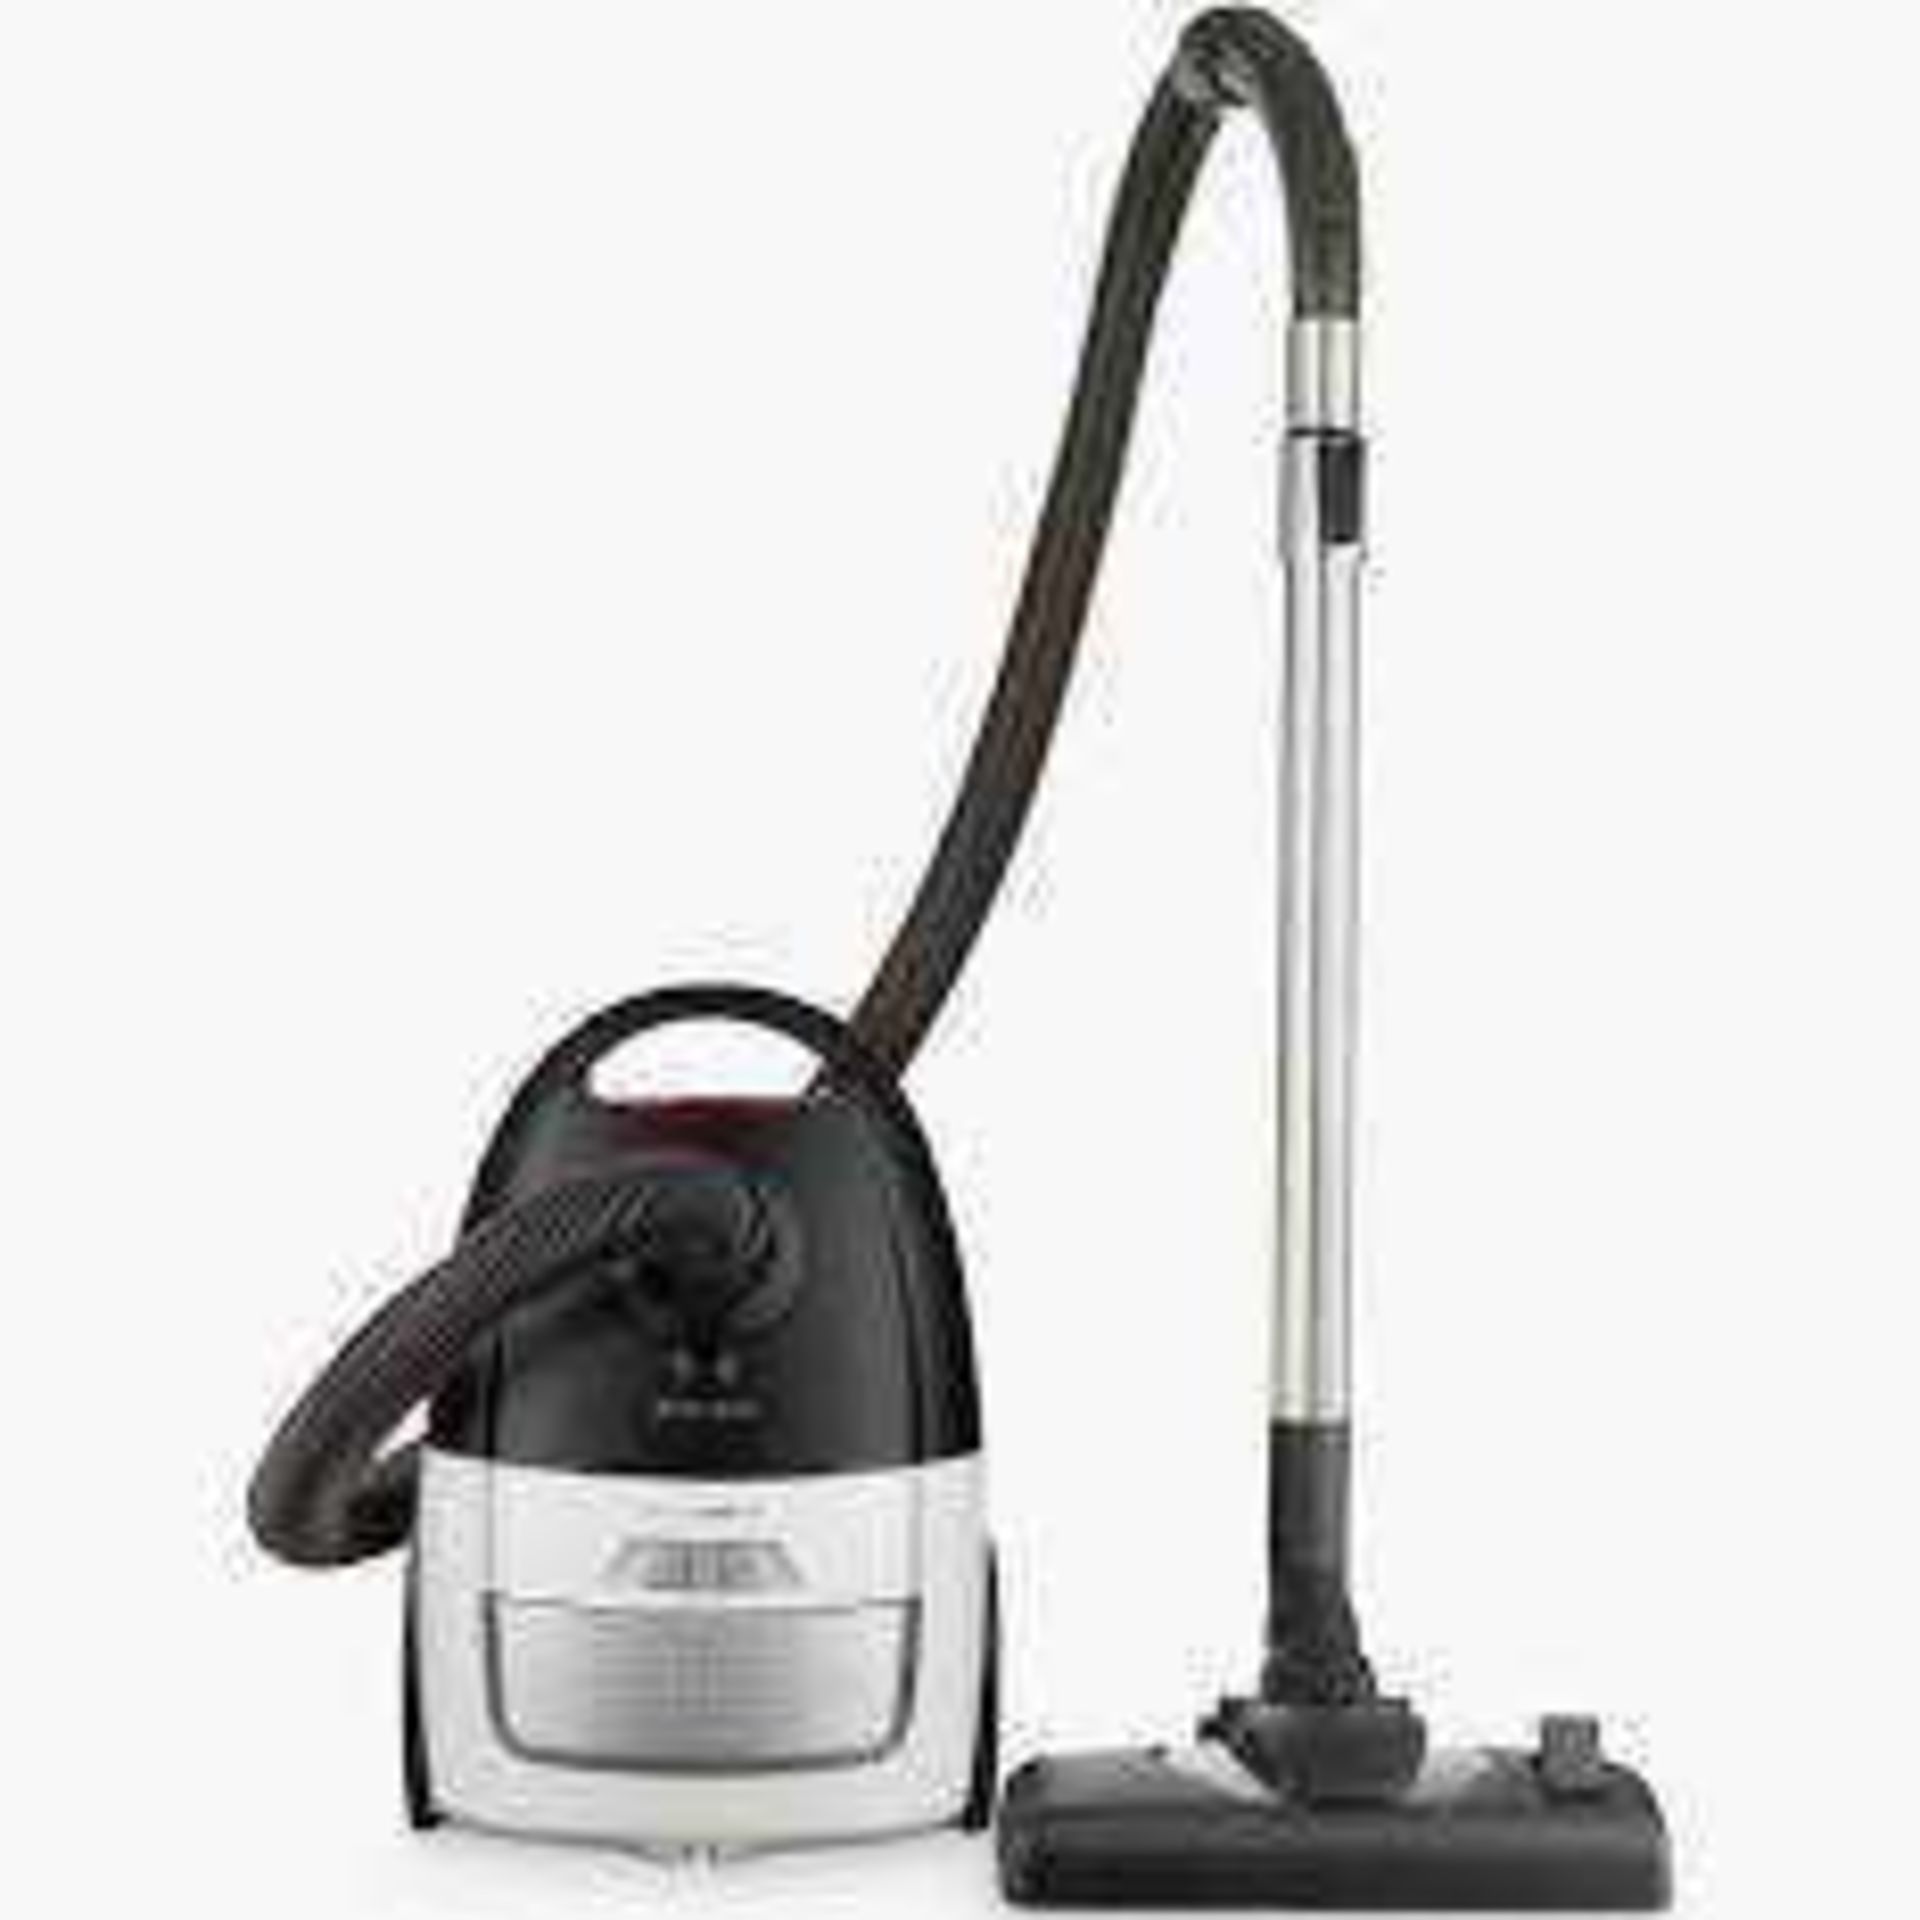 Combined RRP £120 Lot To Contain Two Boxed John Lewis 1.5L Vacuum Cleaners - Image 2 of 2